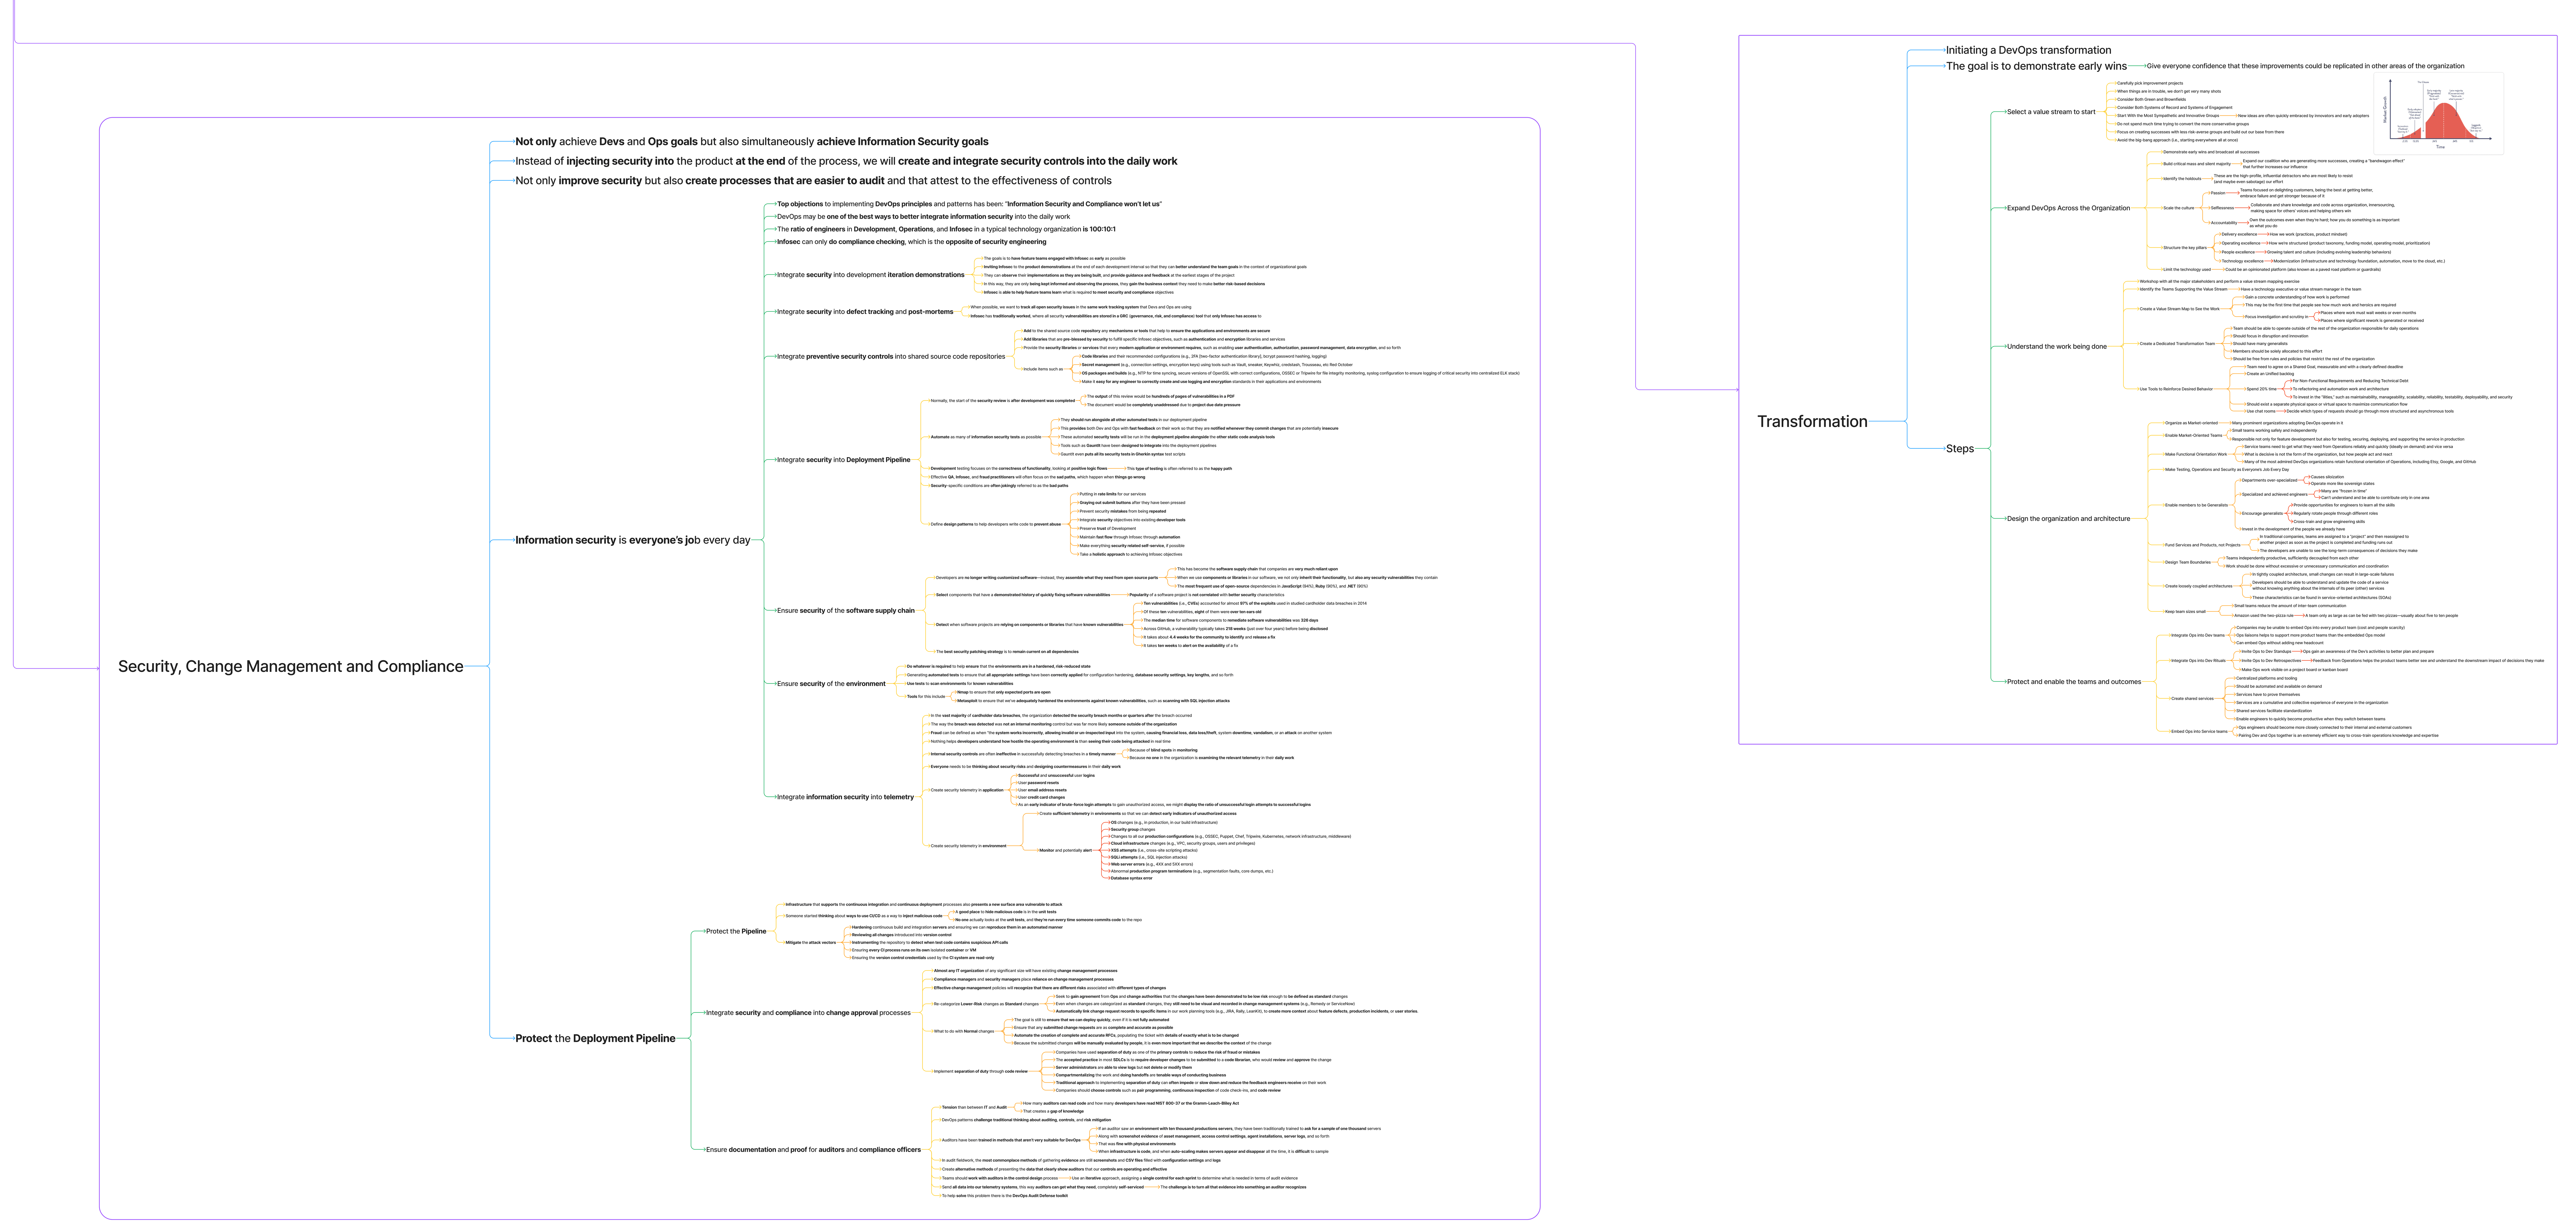 Mind Map - Security and Transformation